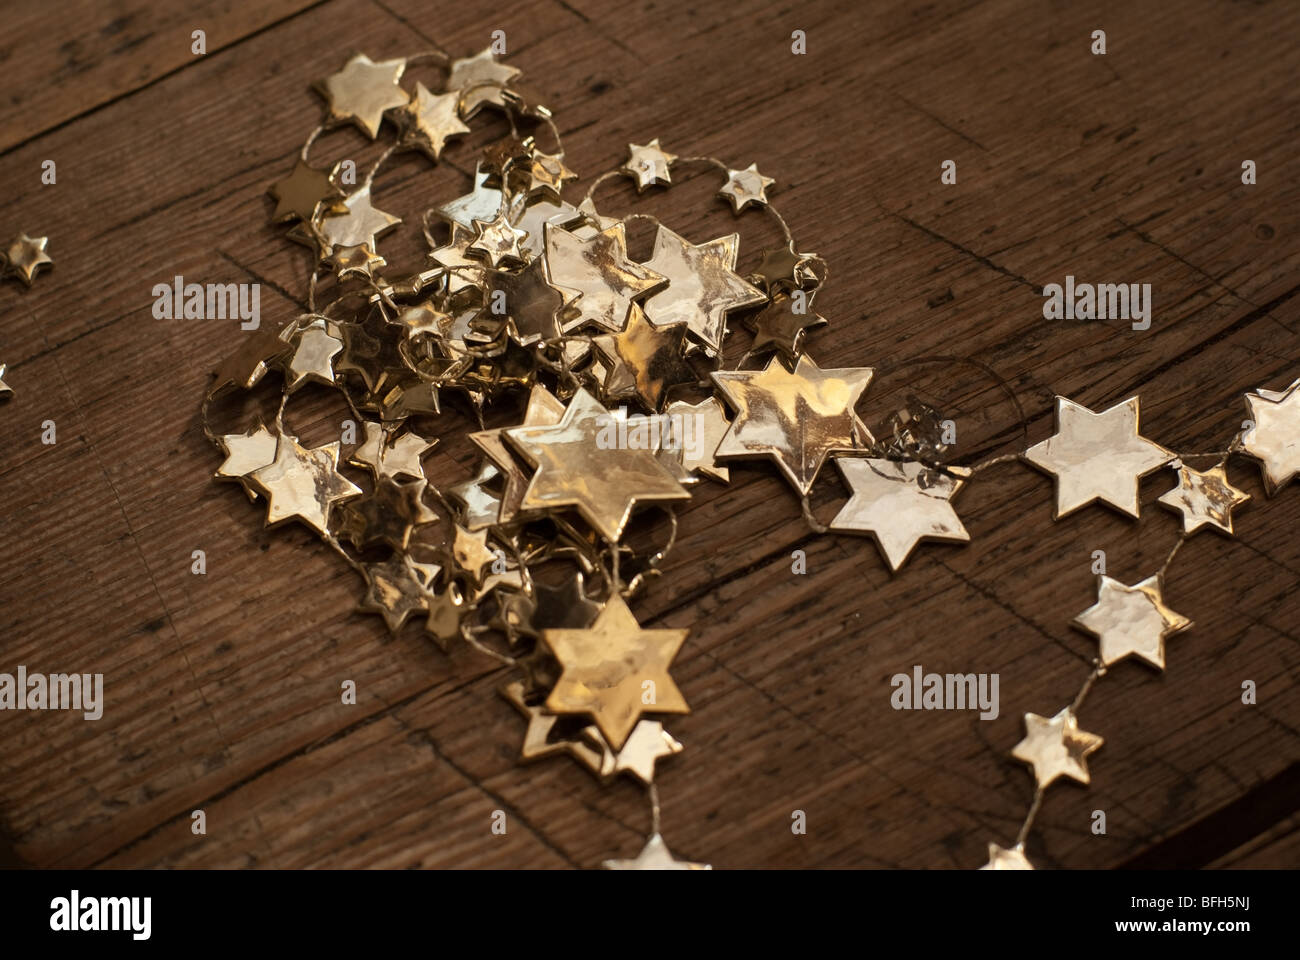 Christmas decorations - golden stars on the wood. Stock Photo